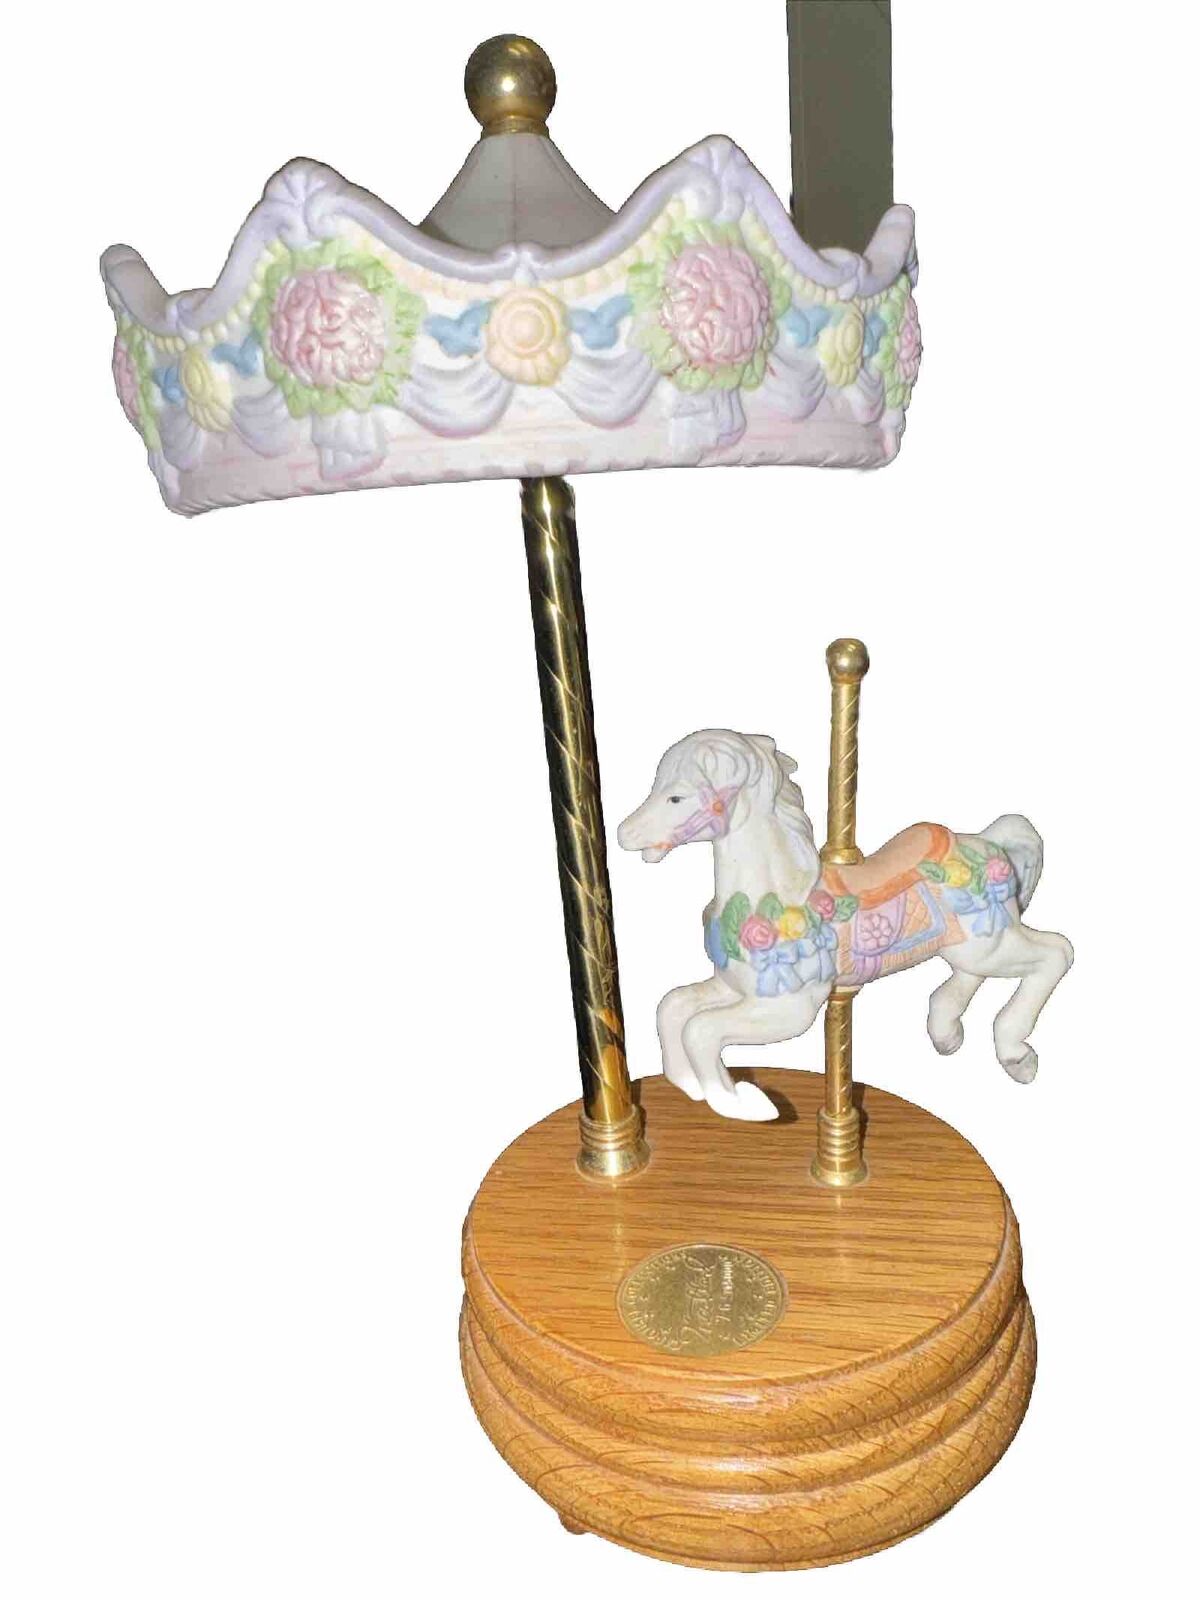 Westland 1989 Horse Carousel Music Box “In The Old Good Summertime”